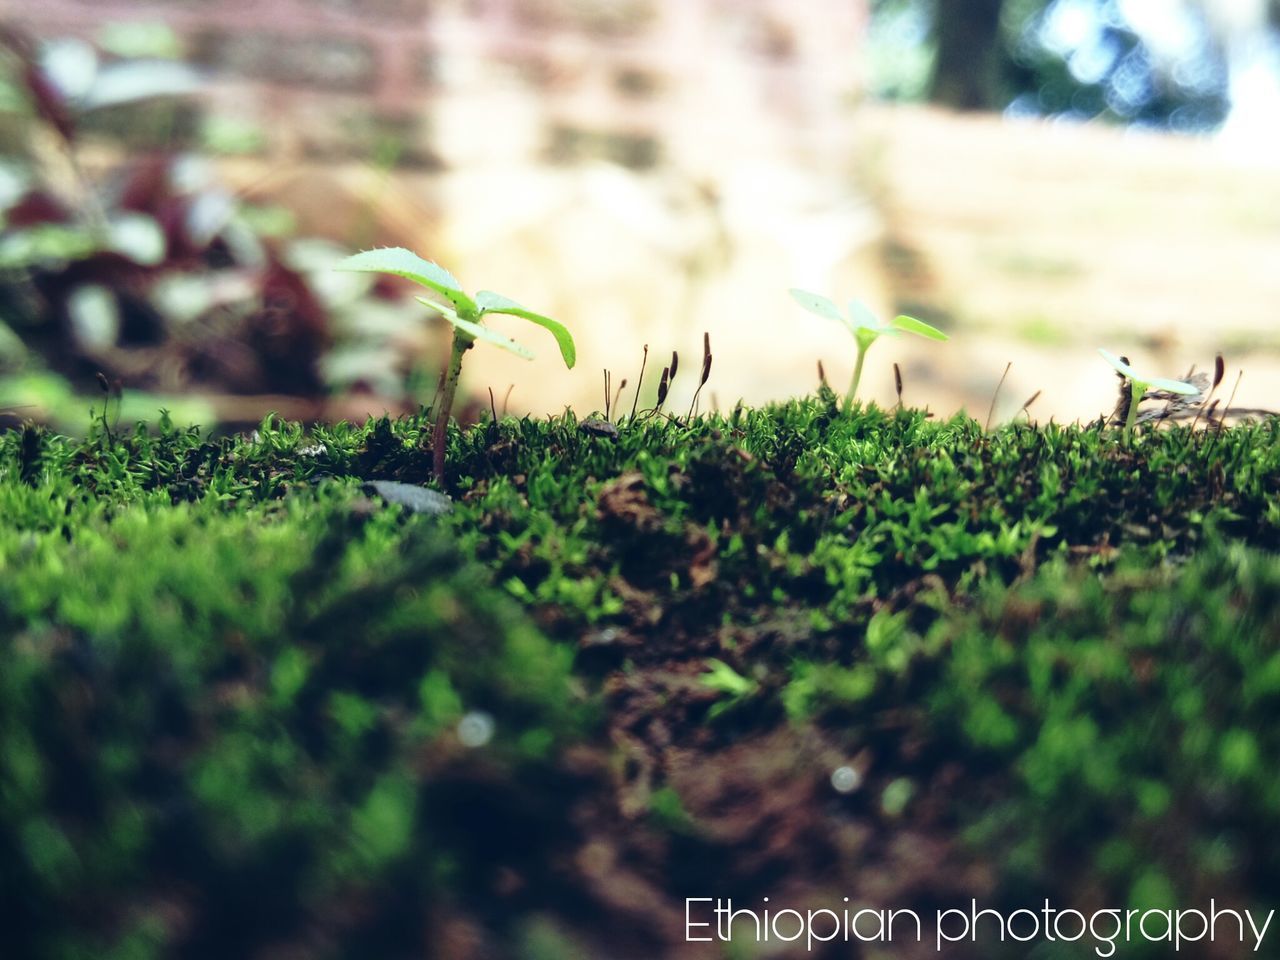 growth, plant, selective focus, nature, green color, grass, outdoors, focus on foreground, no people, close-up, day, fragility, beauty in nature, freshness, flower